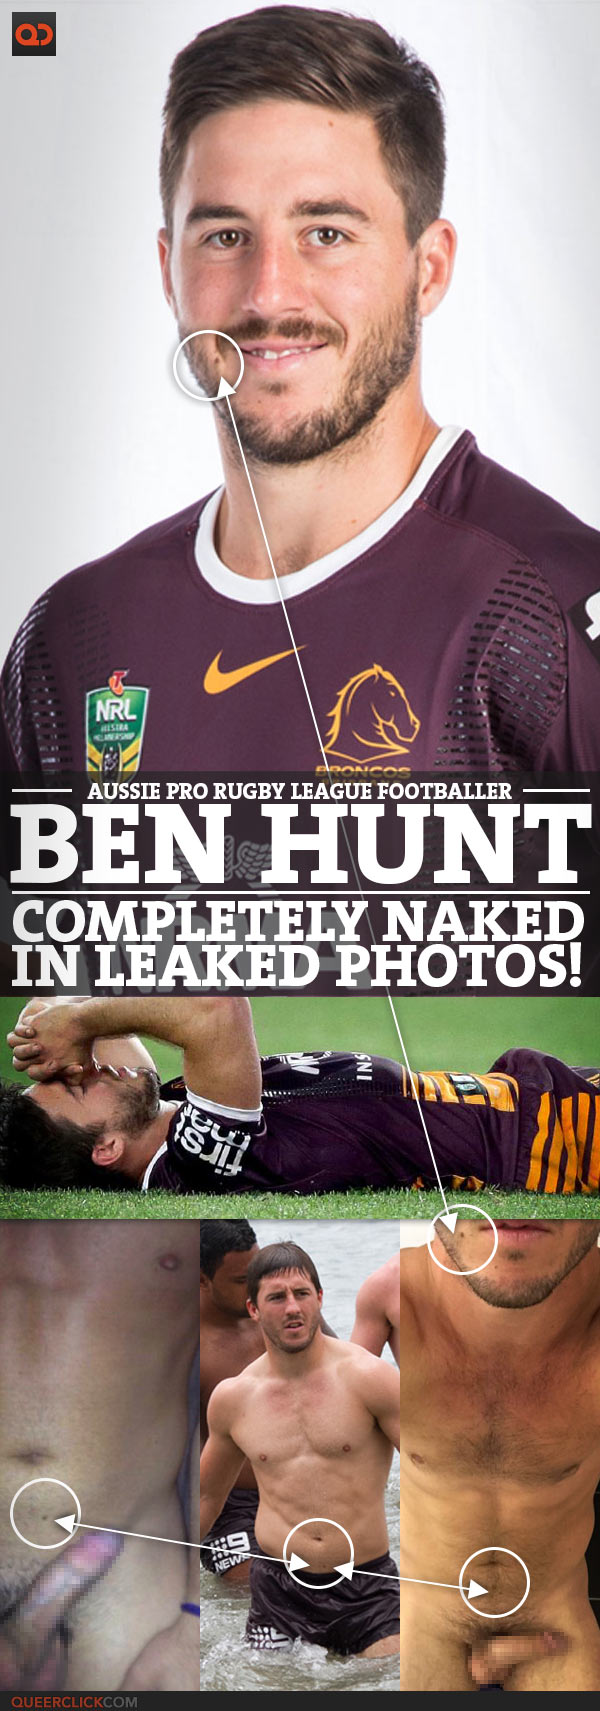 Nude Rugby Men Australian Porn - Ben Hunt, Aussie Pro Rugby League Footballer, Completely Naked In Leaked  Photos! - QueerClick